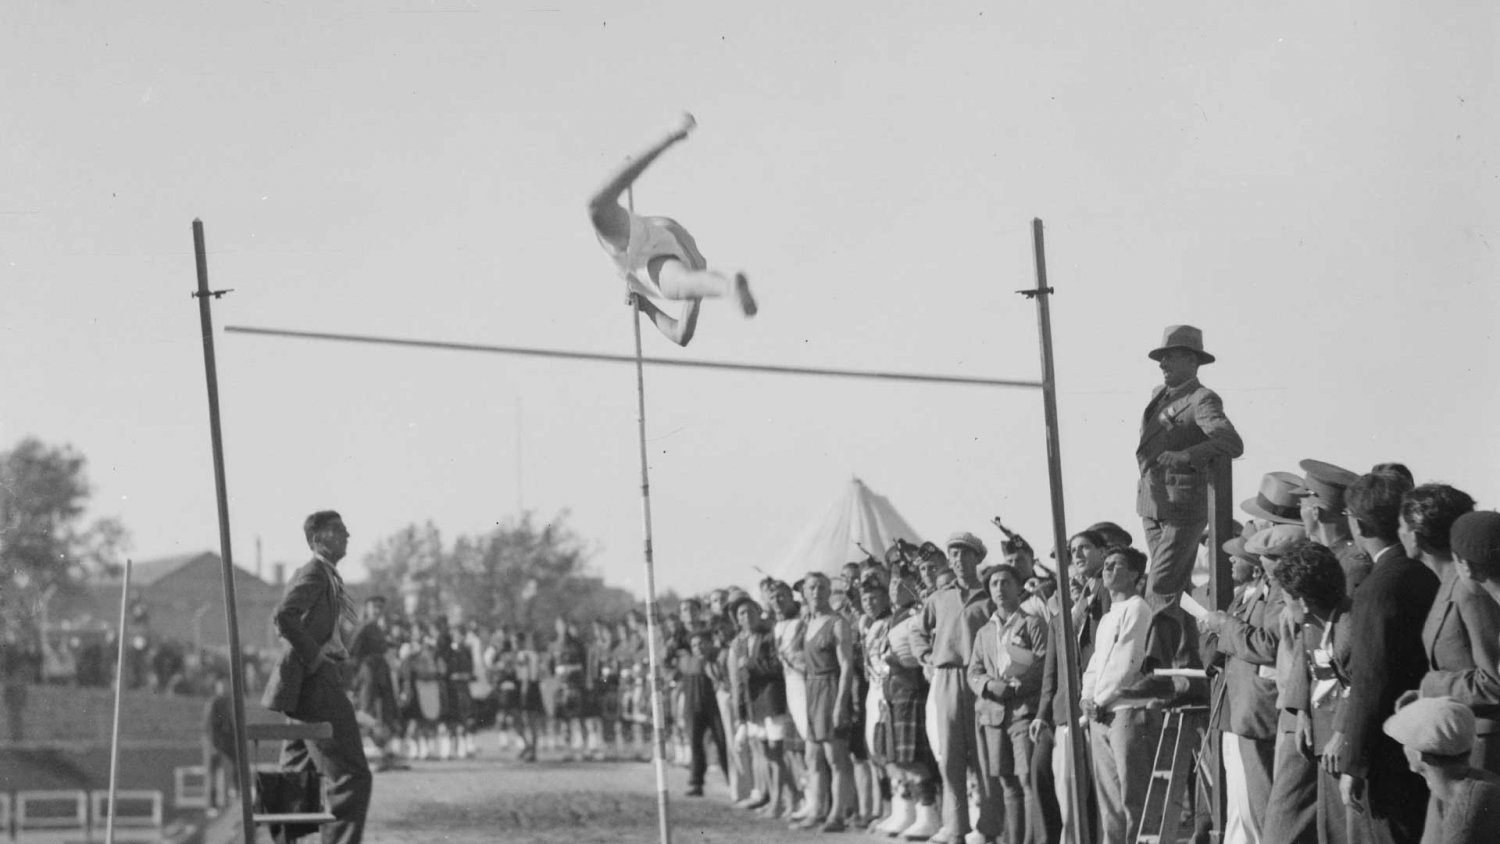 Athletic events at the Jerusalem YMCA; the photo was taken between 1933 and 1946